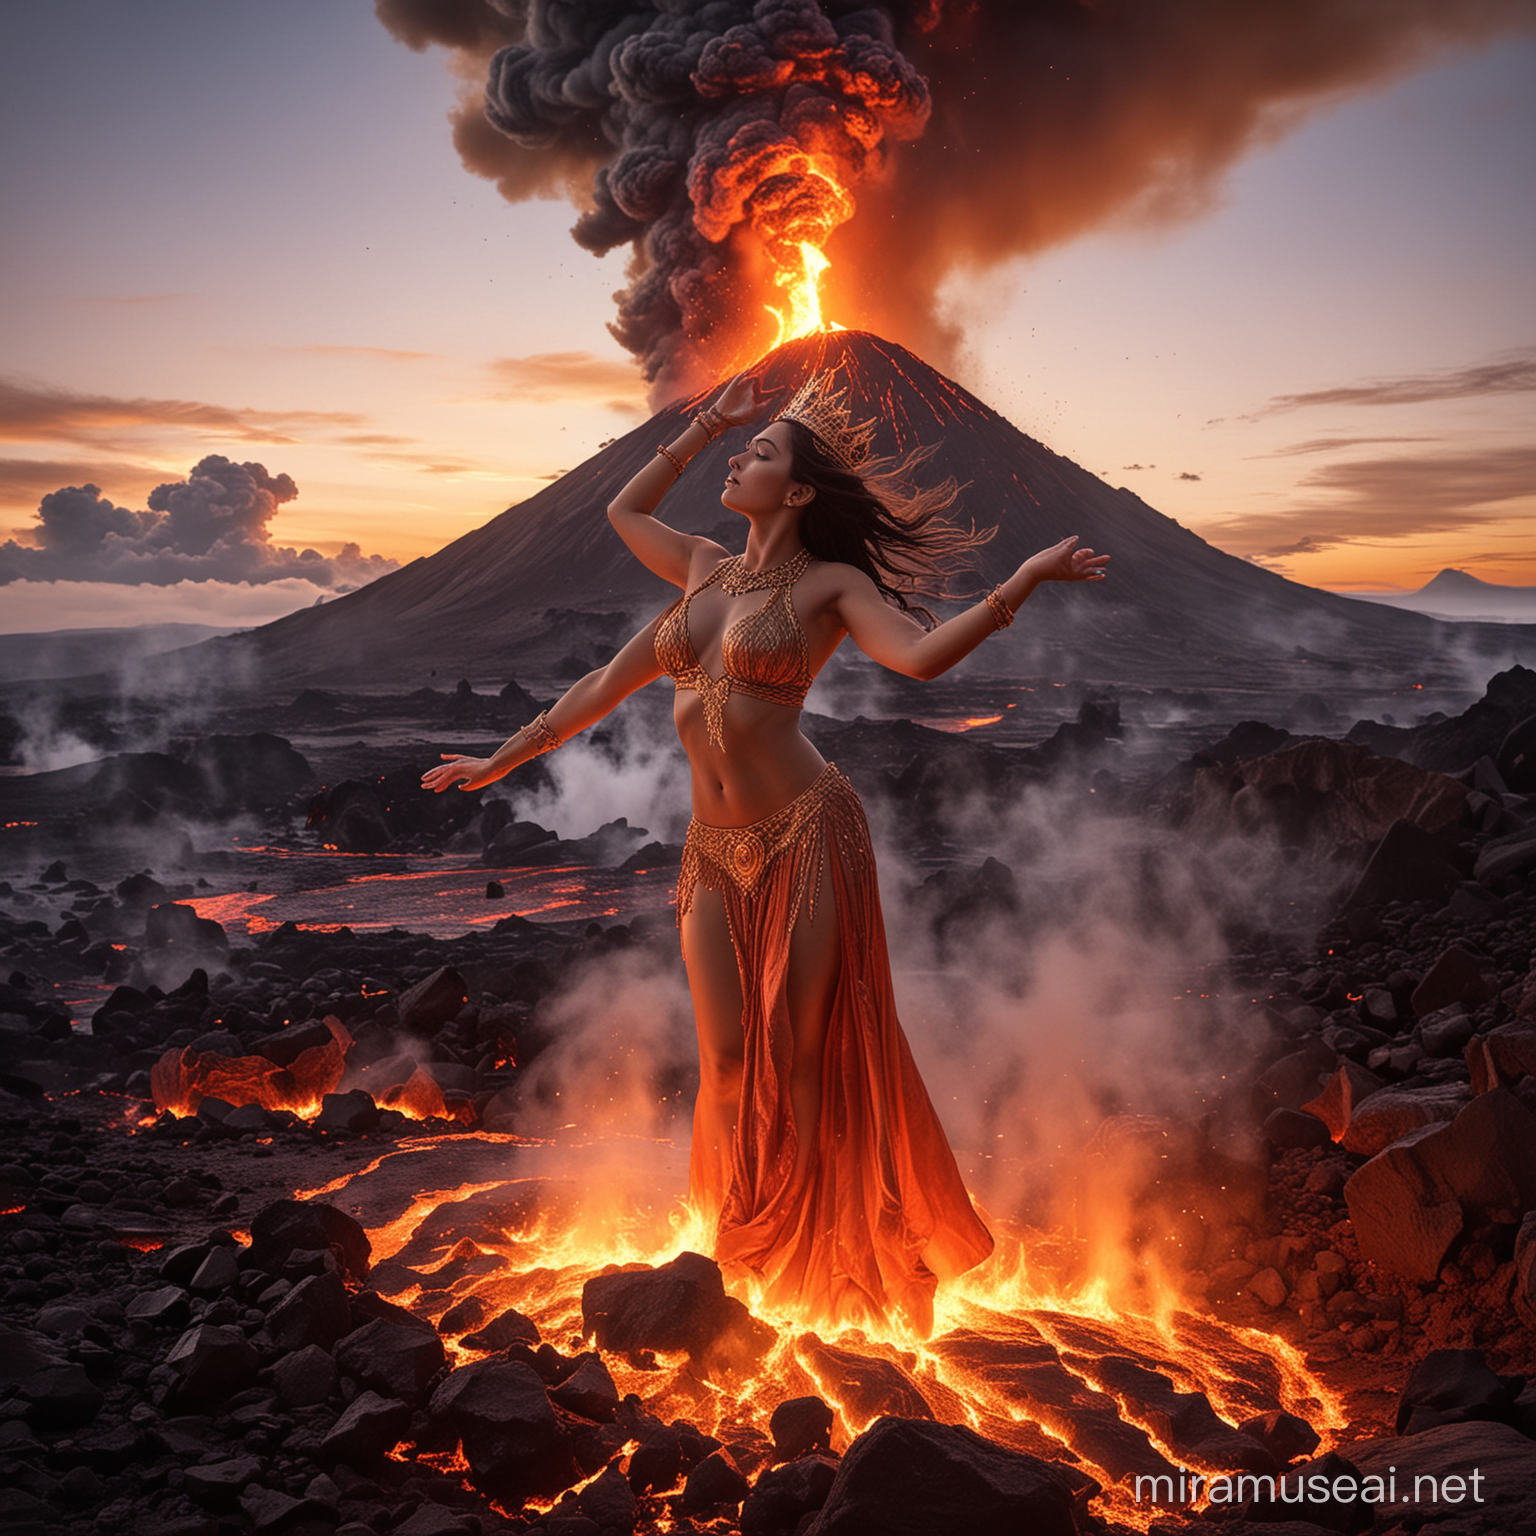 Pele GODDESS OF VOLCANOES The image is of a woman wearing a crown. The tags associated with the image include human face, dance, person, dancer, fire, showgirl, woman, abdomen, clothing, navel, and belly dance.The image shows a volcanic eruption with lava flowing down the mountain, accompanied by smoke and flames. It depicts a natural phenomenon where molten rock and gases escape from a fissure on the Earth's surface, creating a fiery and explosive scene.The image shows a person standing on a mountain with a volcano in the background as the sun sets. The scene is filled with clouds and hints of lava indicating volcanic activity.Double Cheeked up